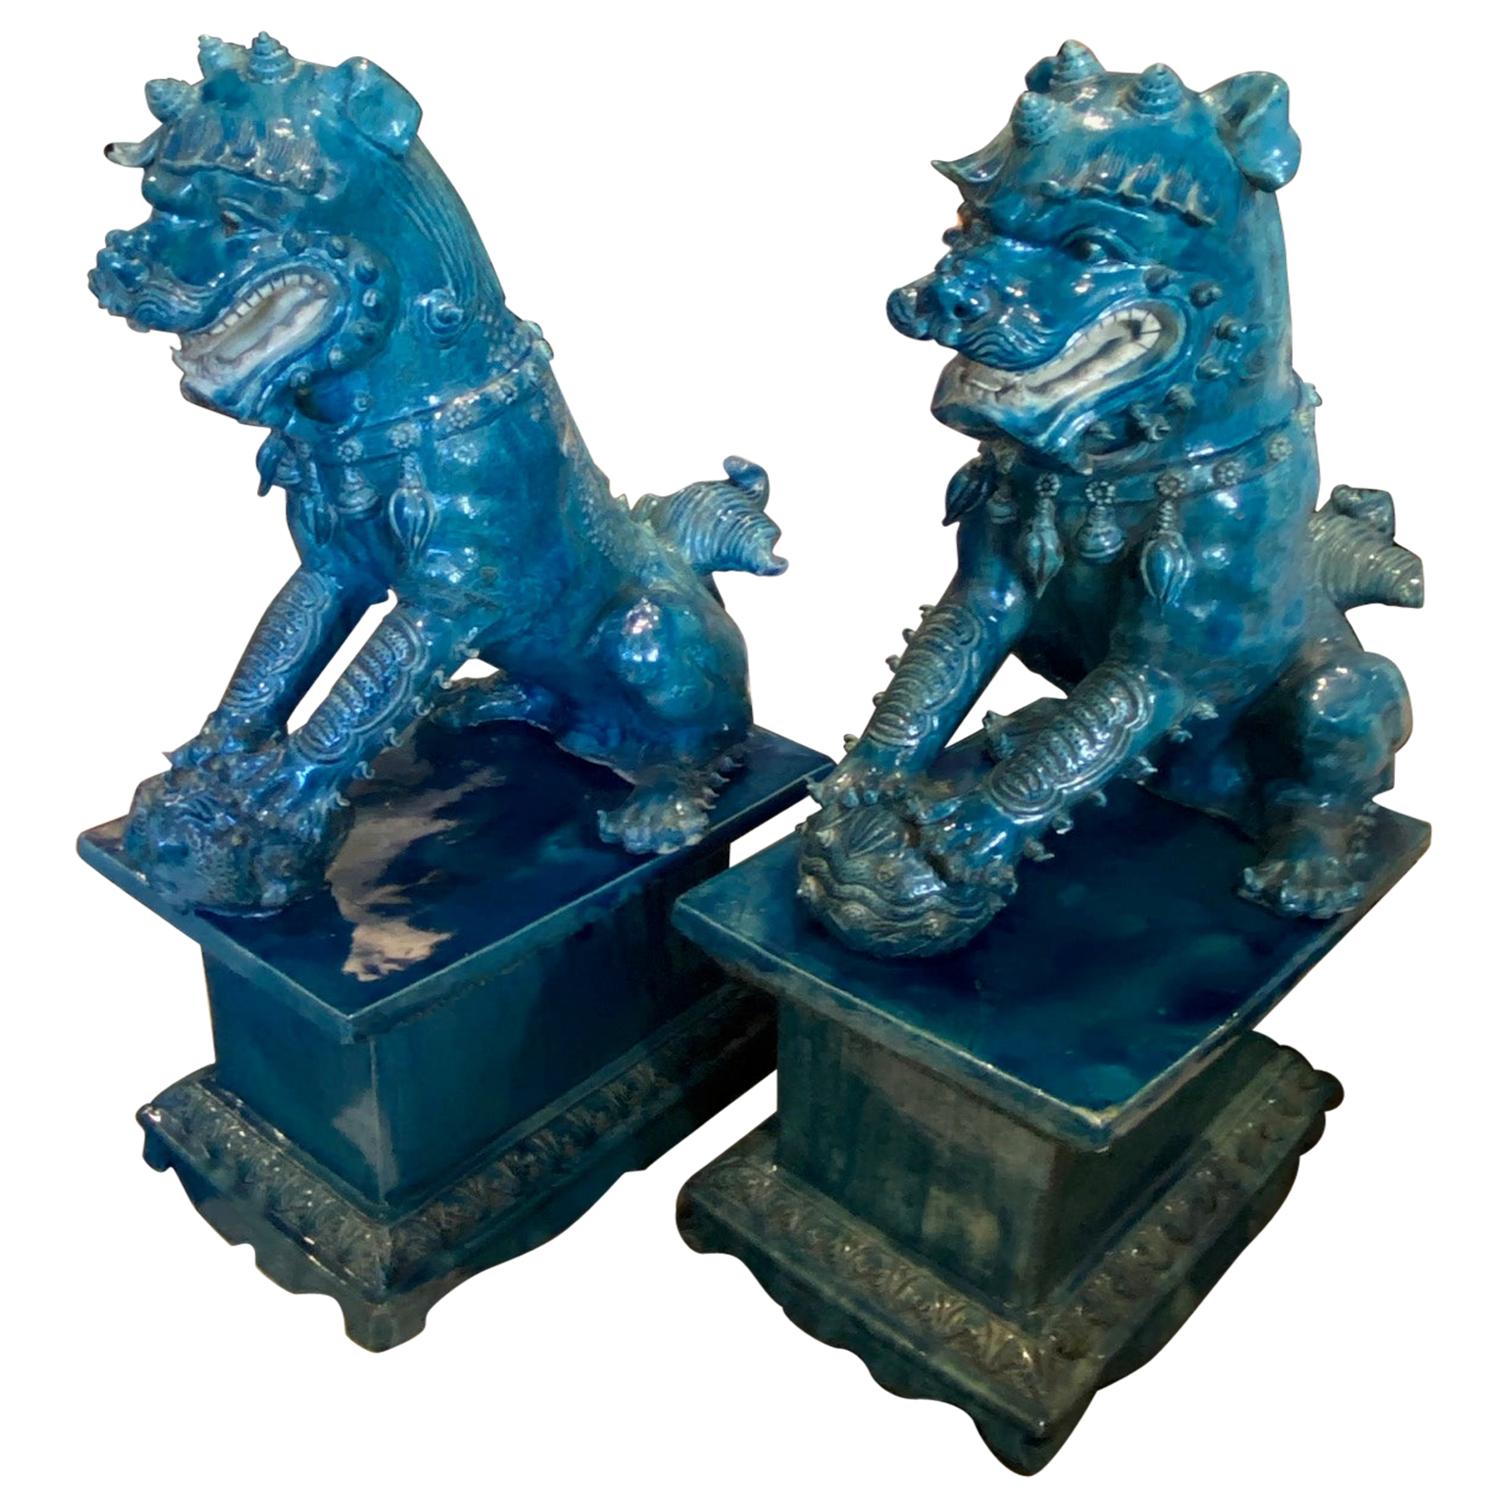 Pair of Monumental Foo Dogs on Stands